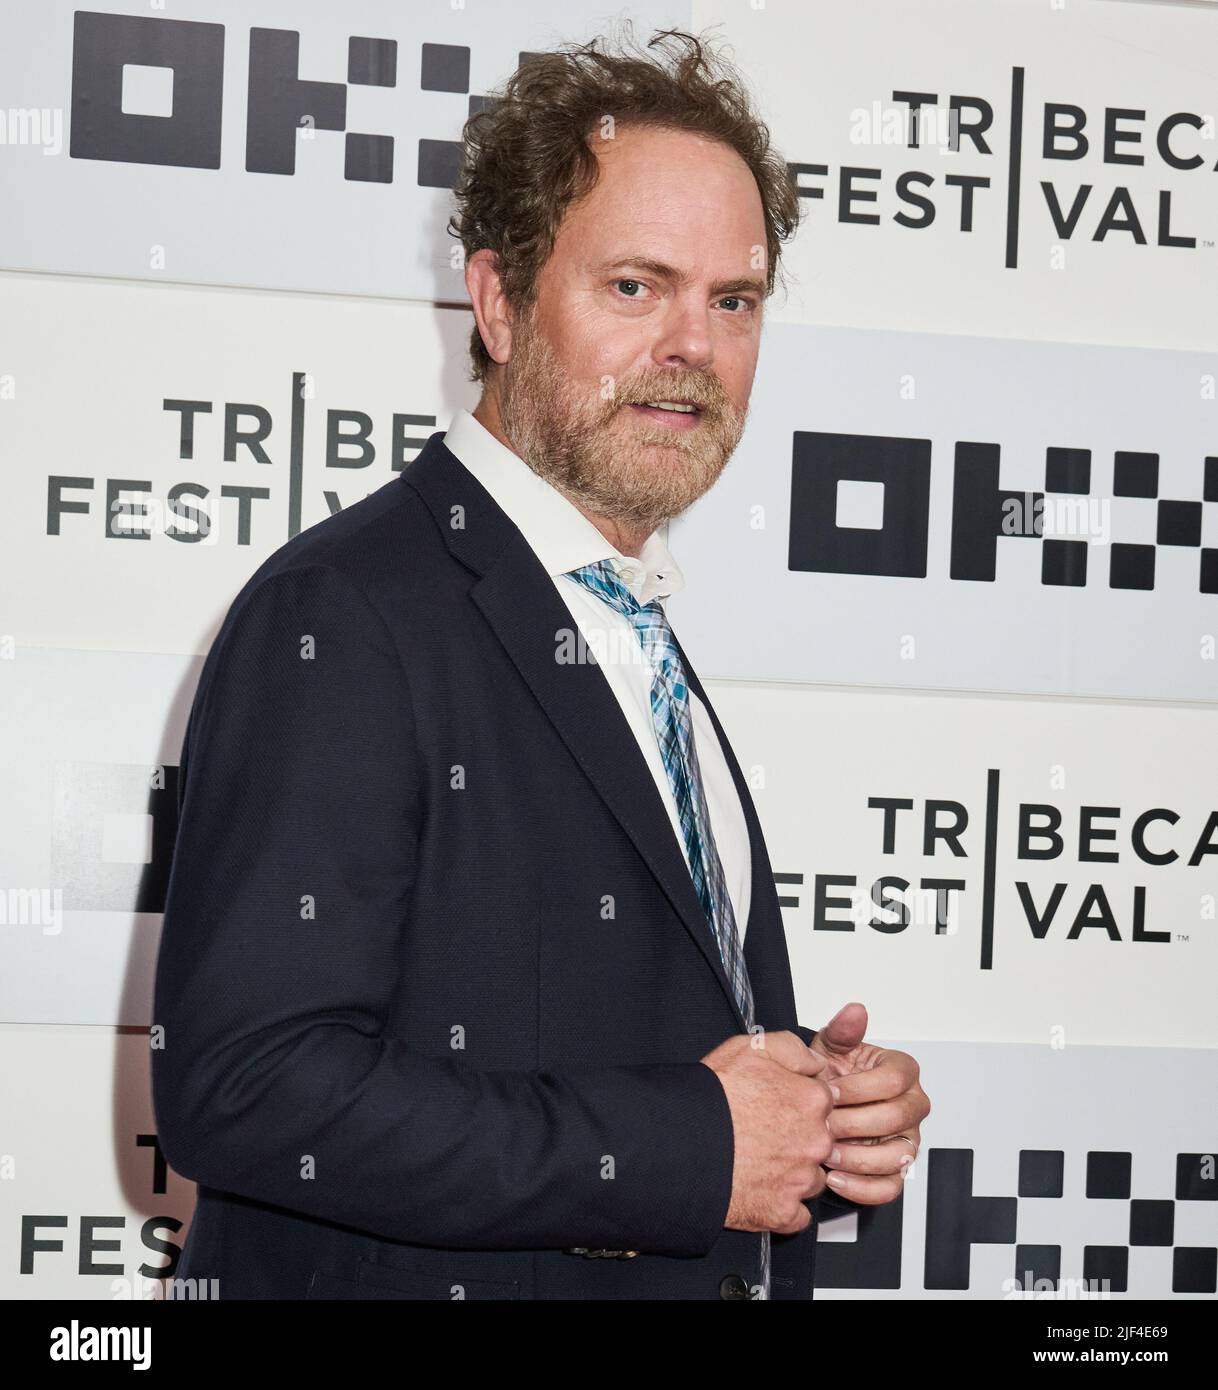 NEW YORK, NY, USA - JUNE 15, 2022: Rainn Wilson attends the Tribeca Festival Premiere of 'Jerry & Marge Go Large'. Stock Photo